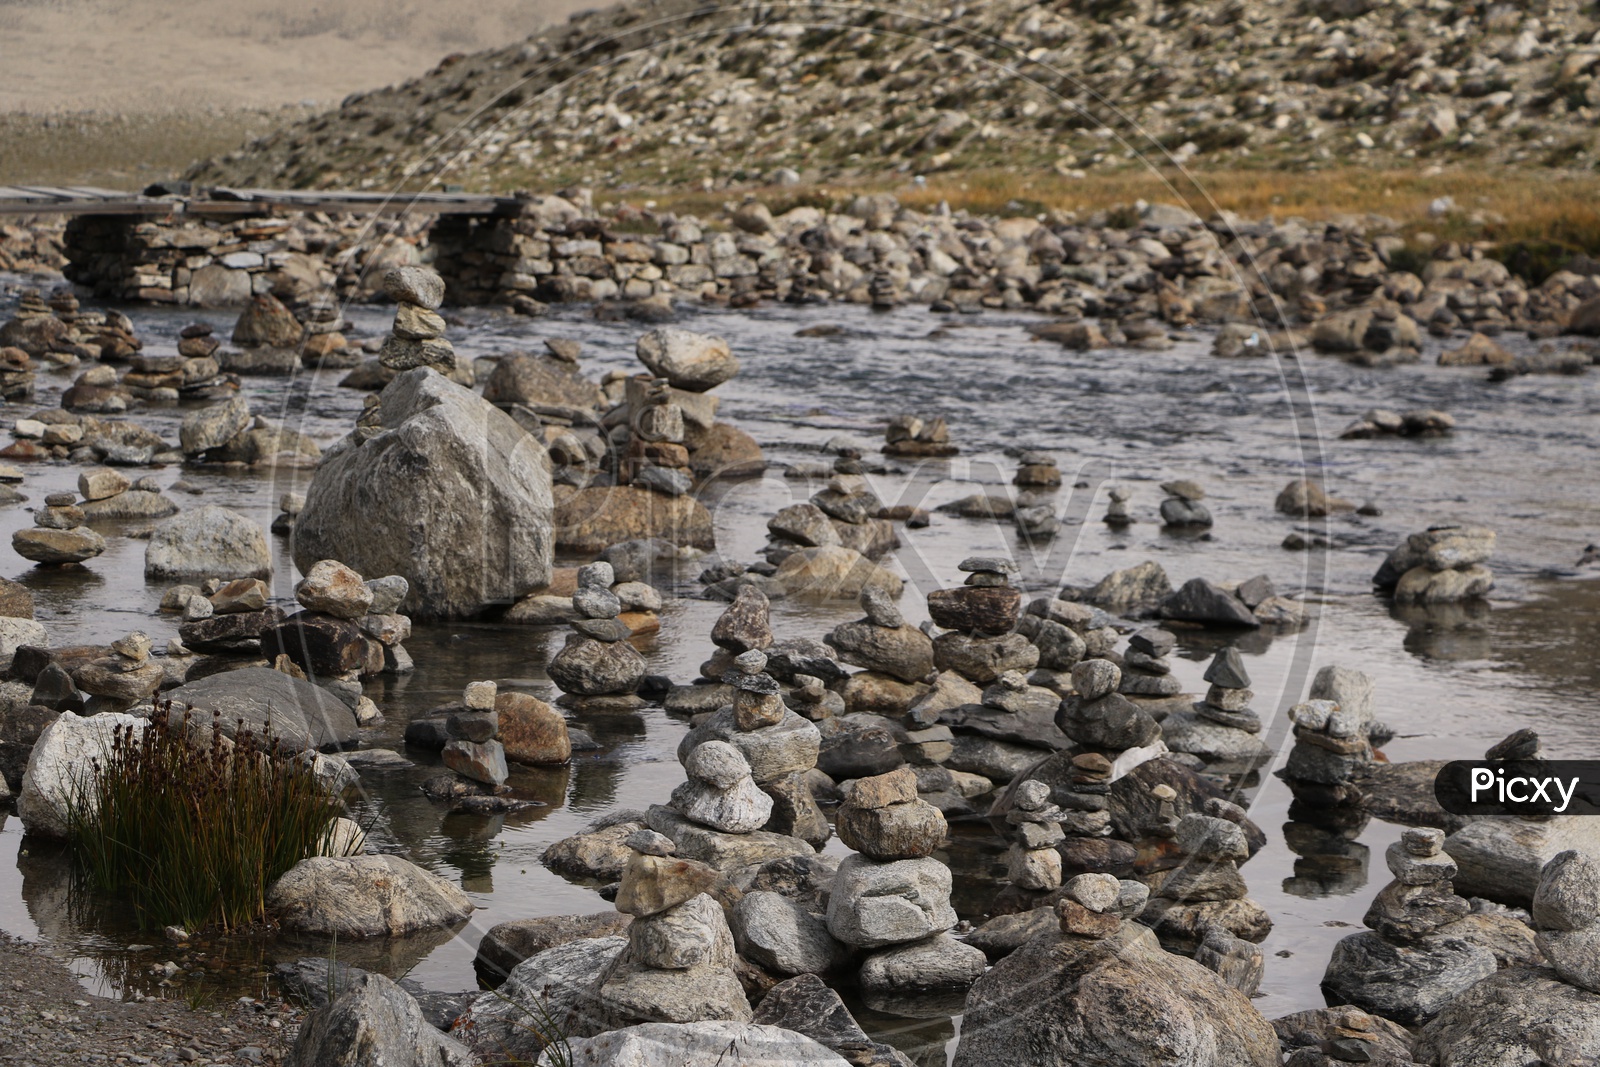 Stacking of rocks at the river in Sikkim